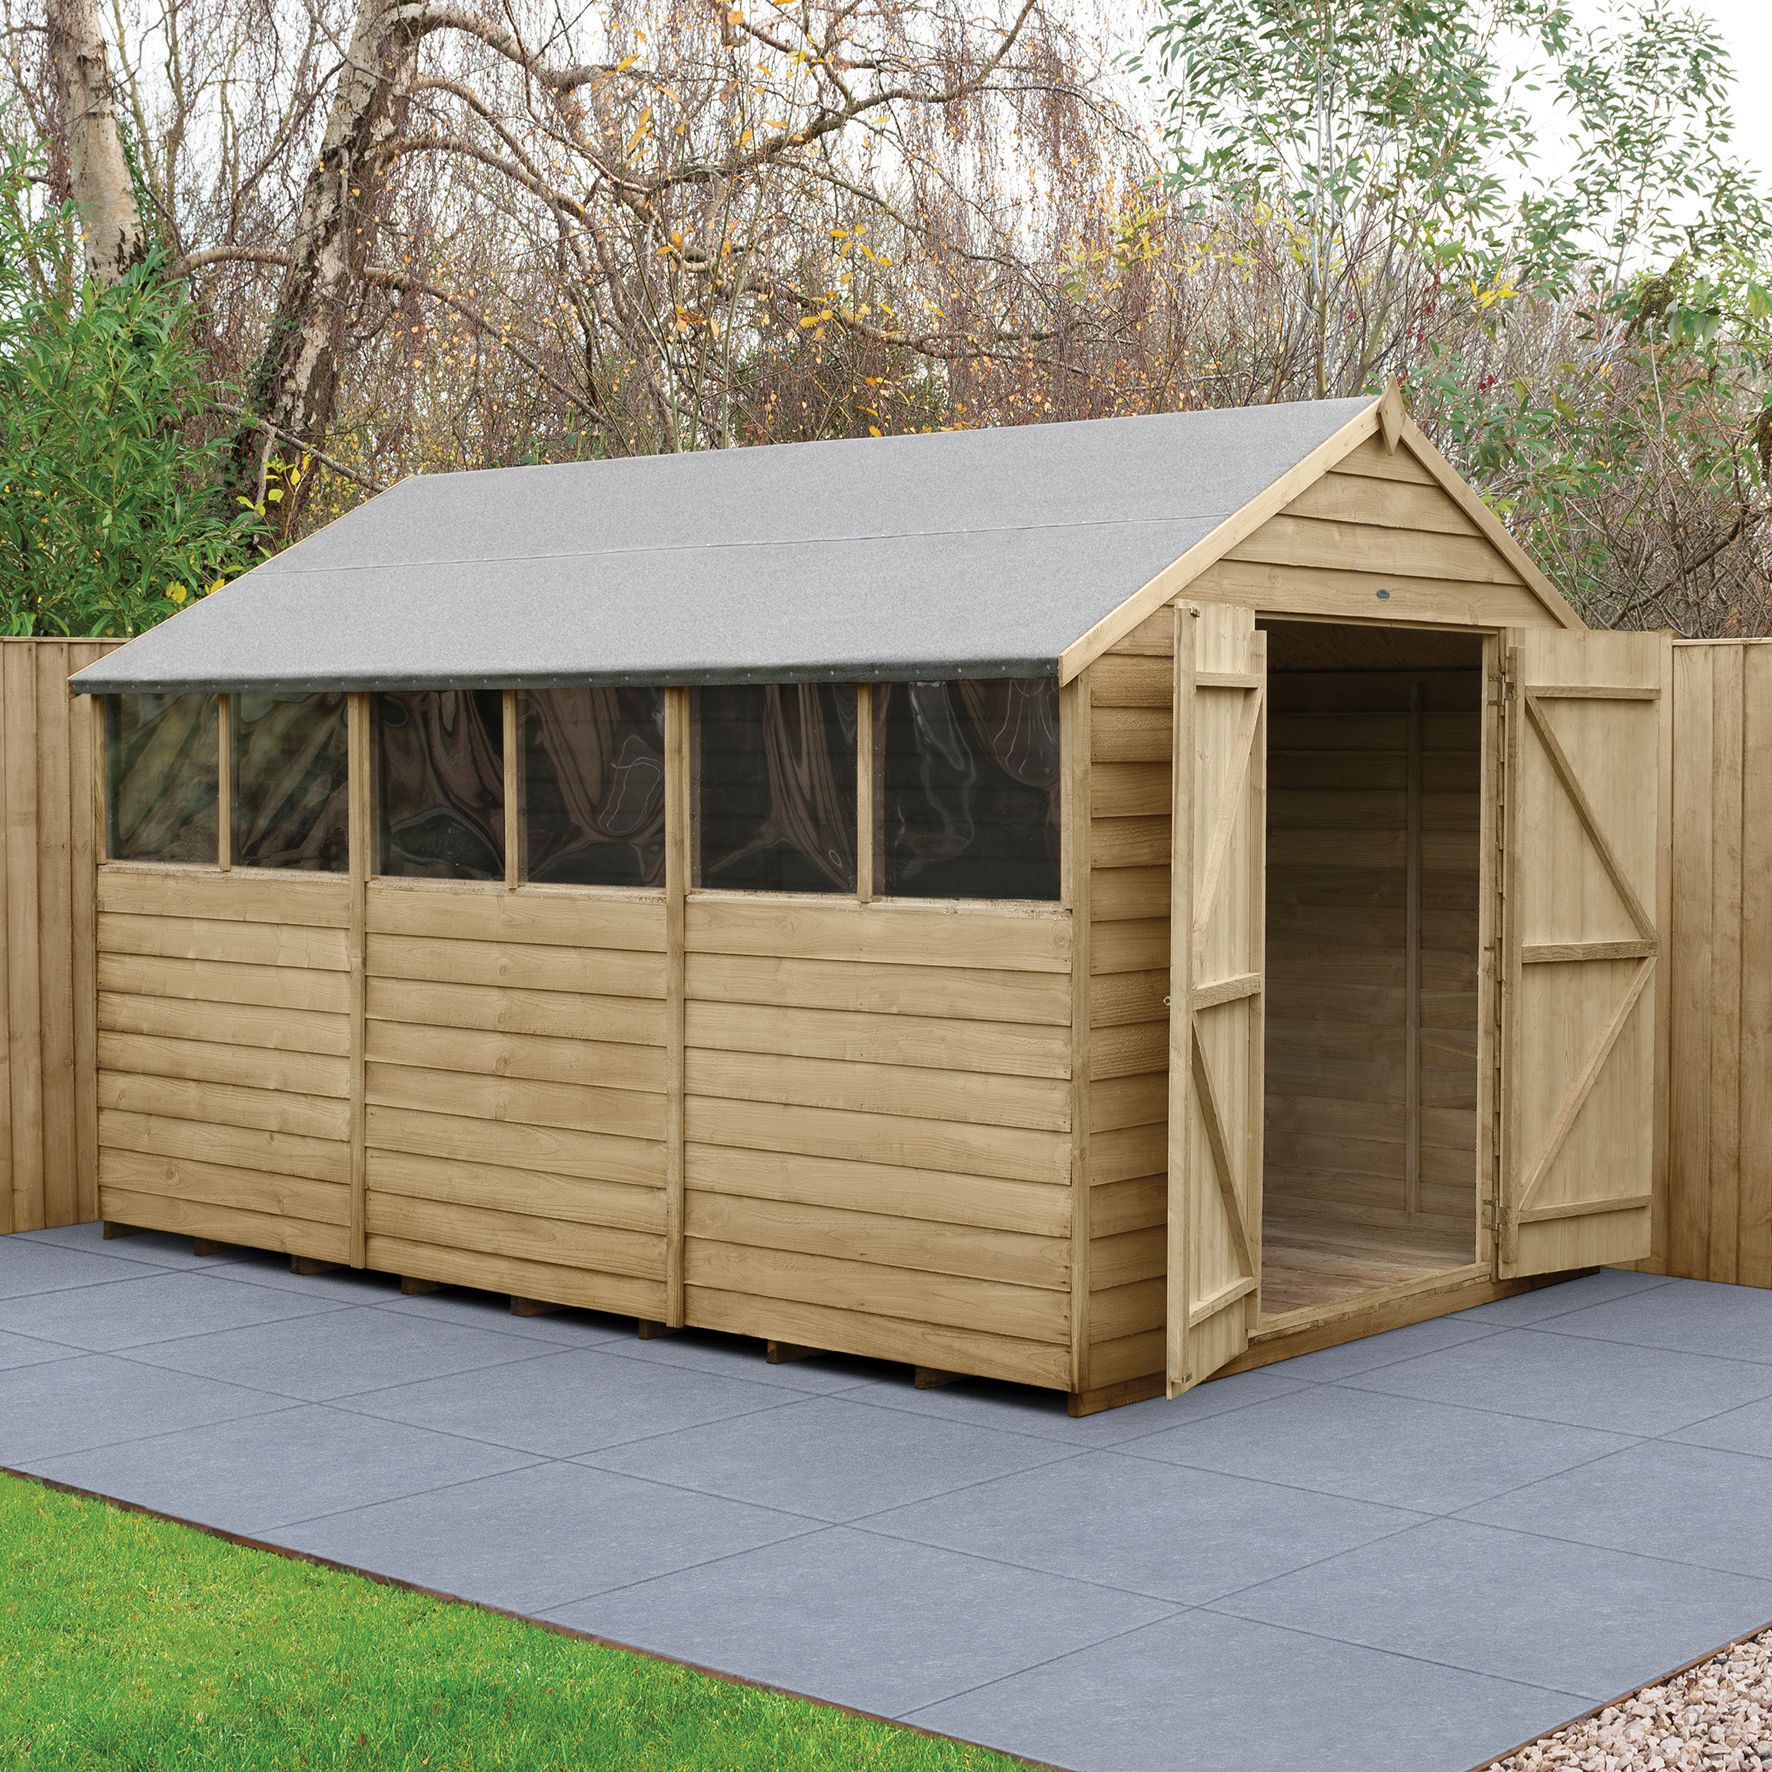 Image of Forest Garden 12 x 8ft Large Double Door Overlap Apex Pressure Treated Shed with Assembly